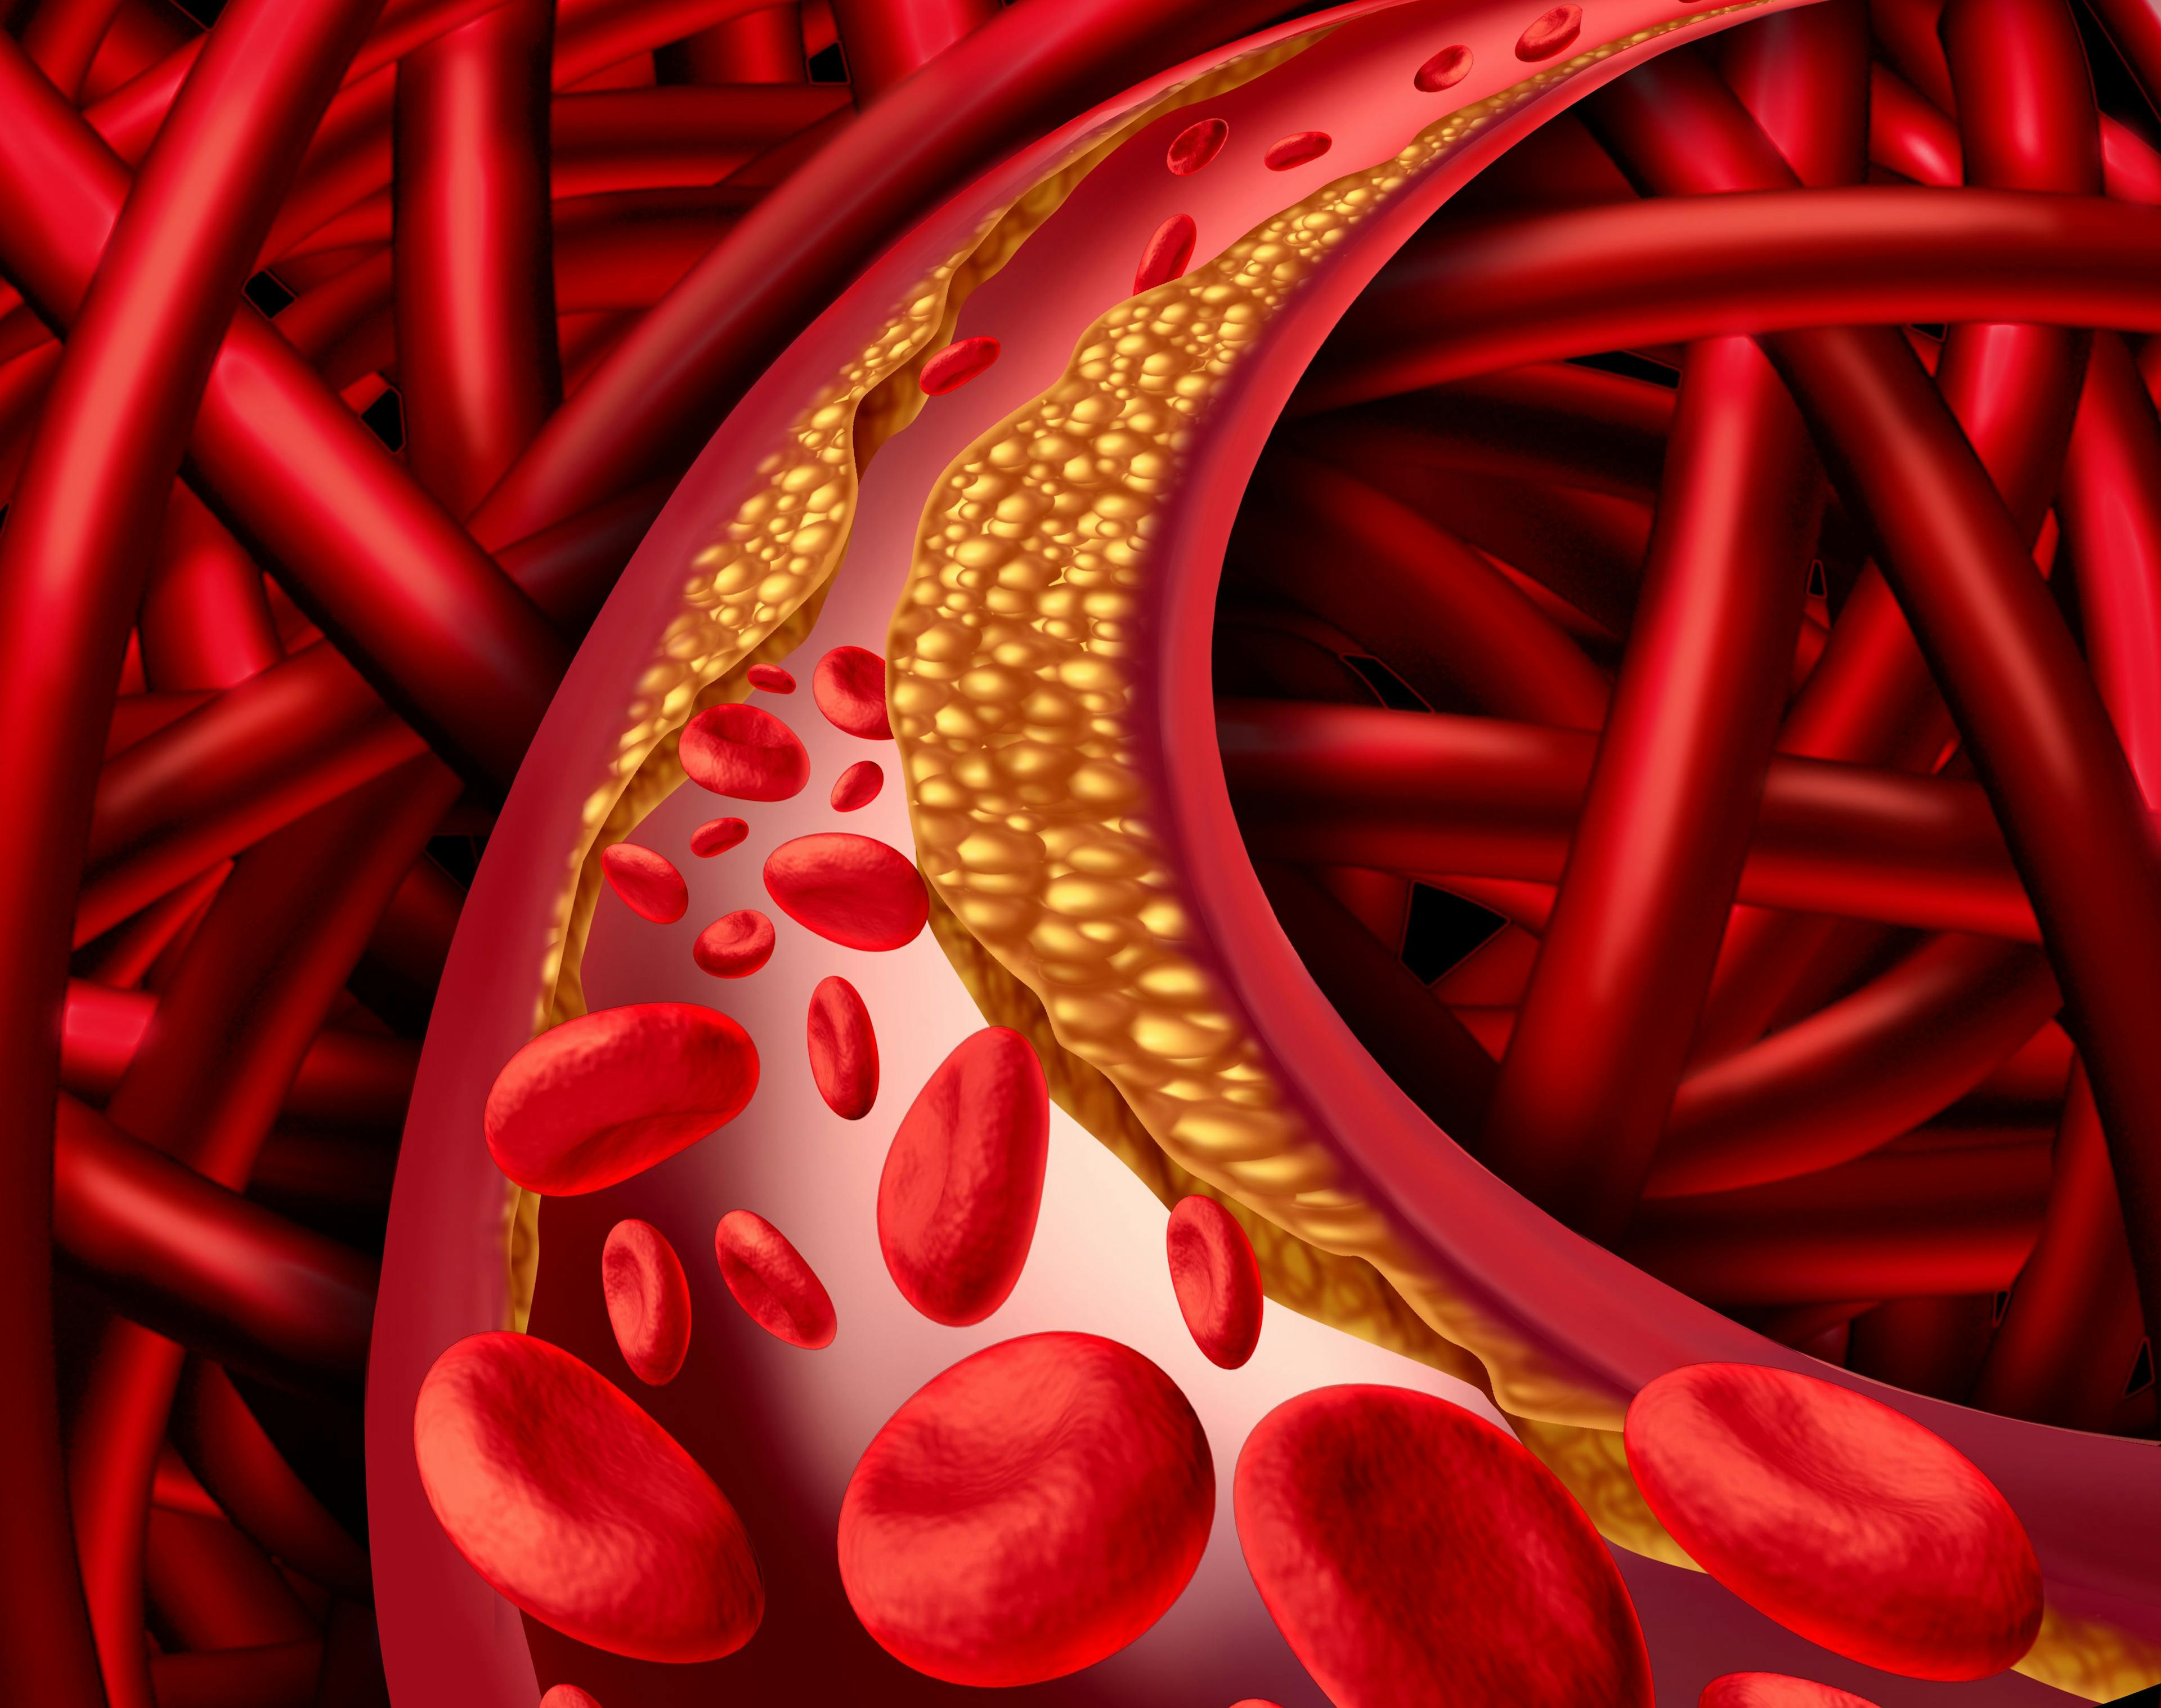 SCAI Releases New Statement on Sex-Based Considerations in Myocardial Revascularization